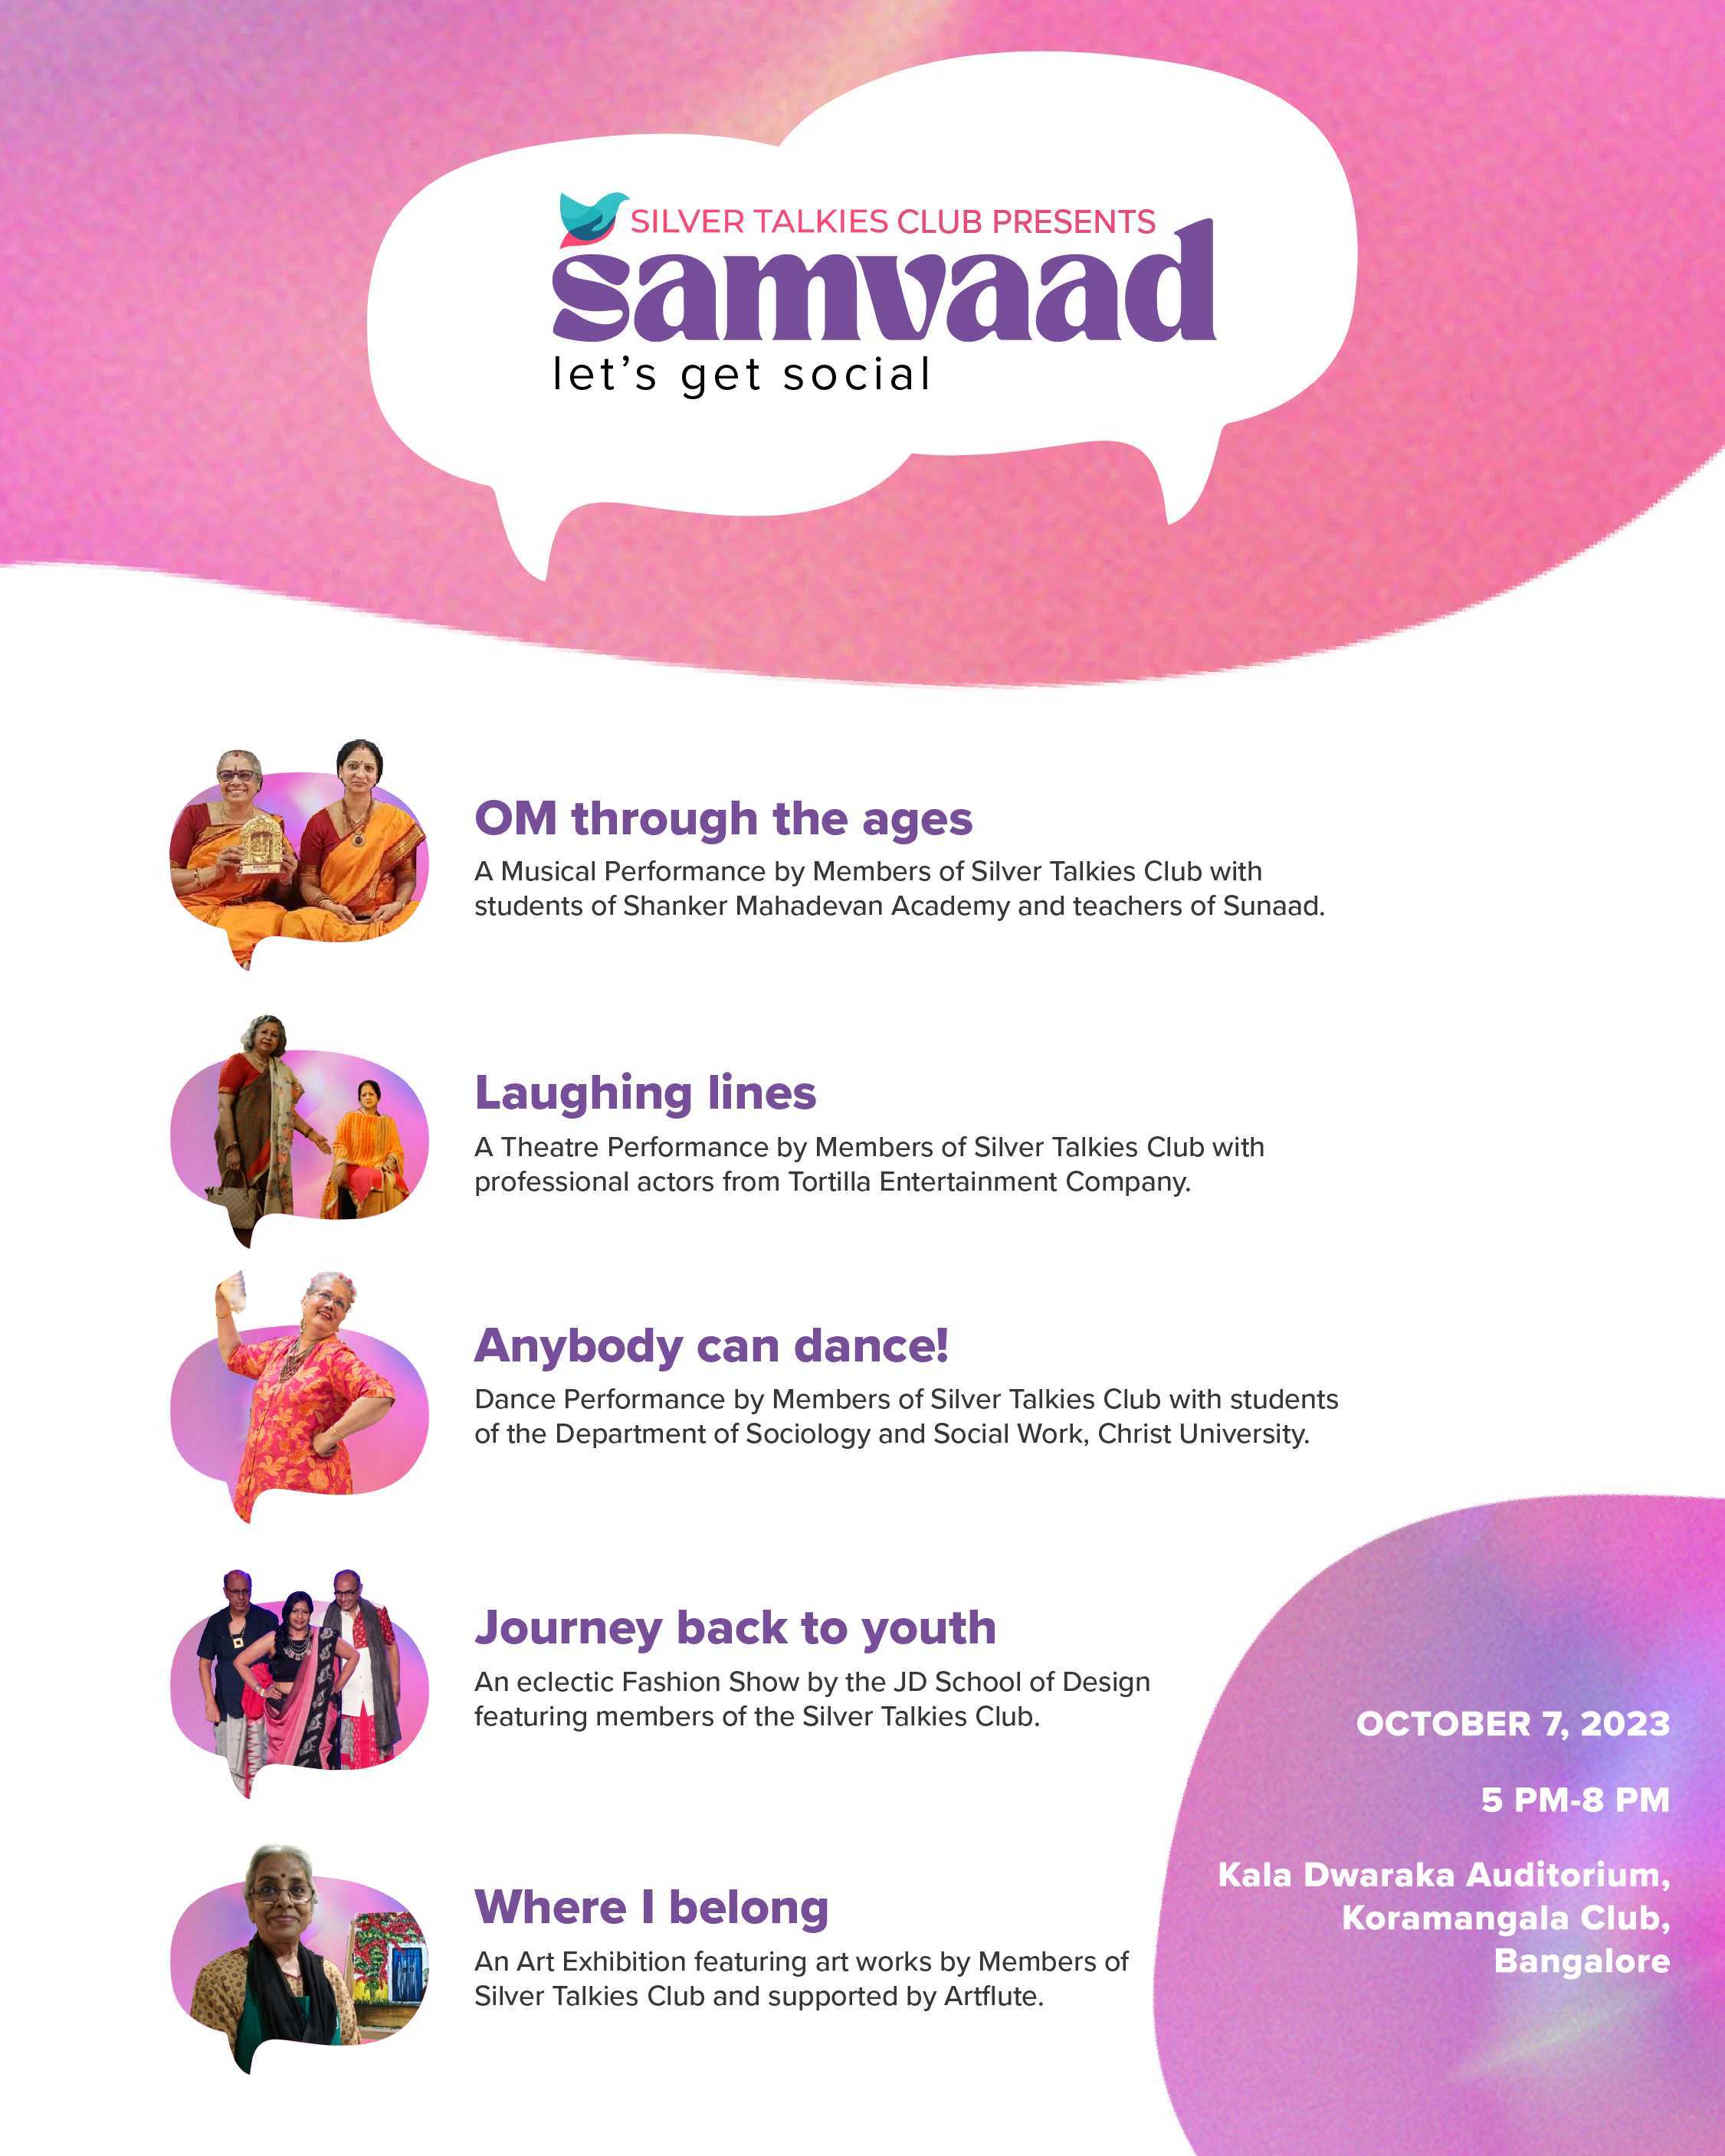 The schedule of Samvaad with prestigious collaborators creating a dazzling cultural tapestry